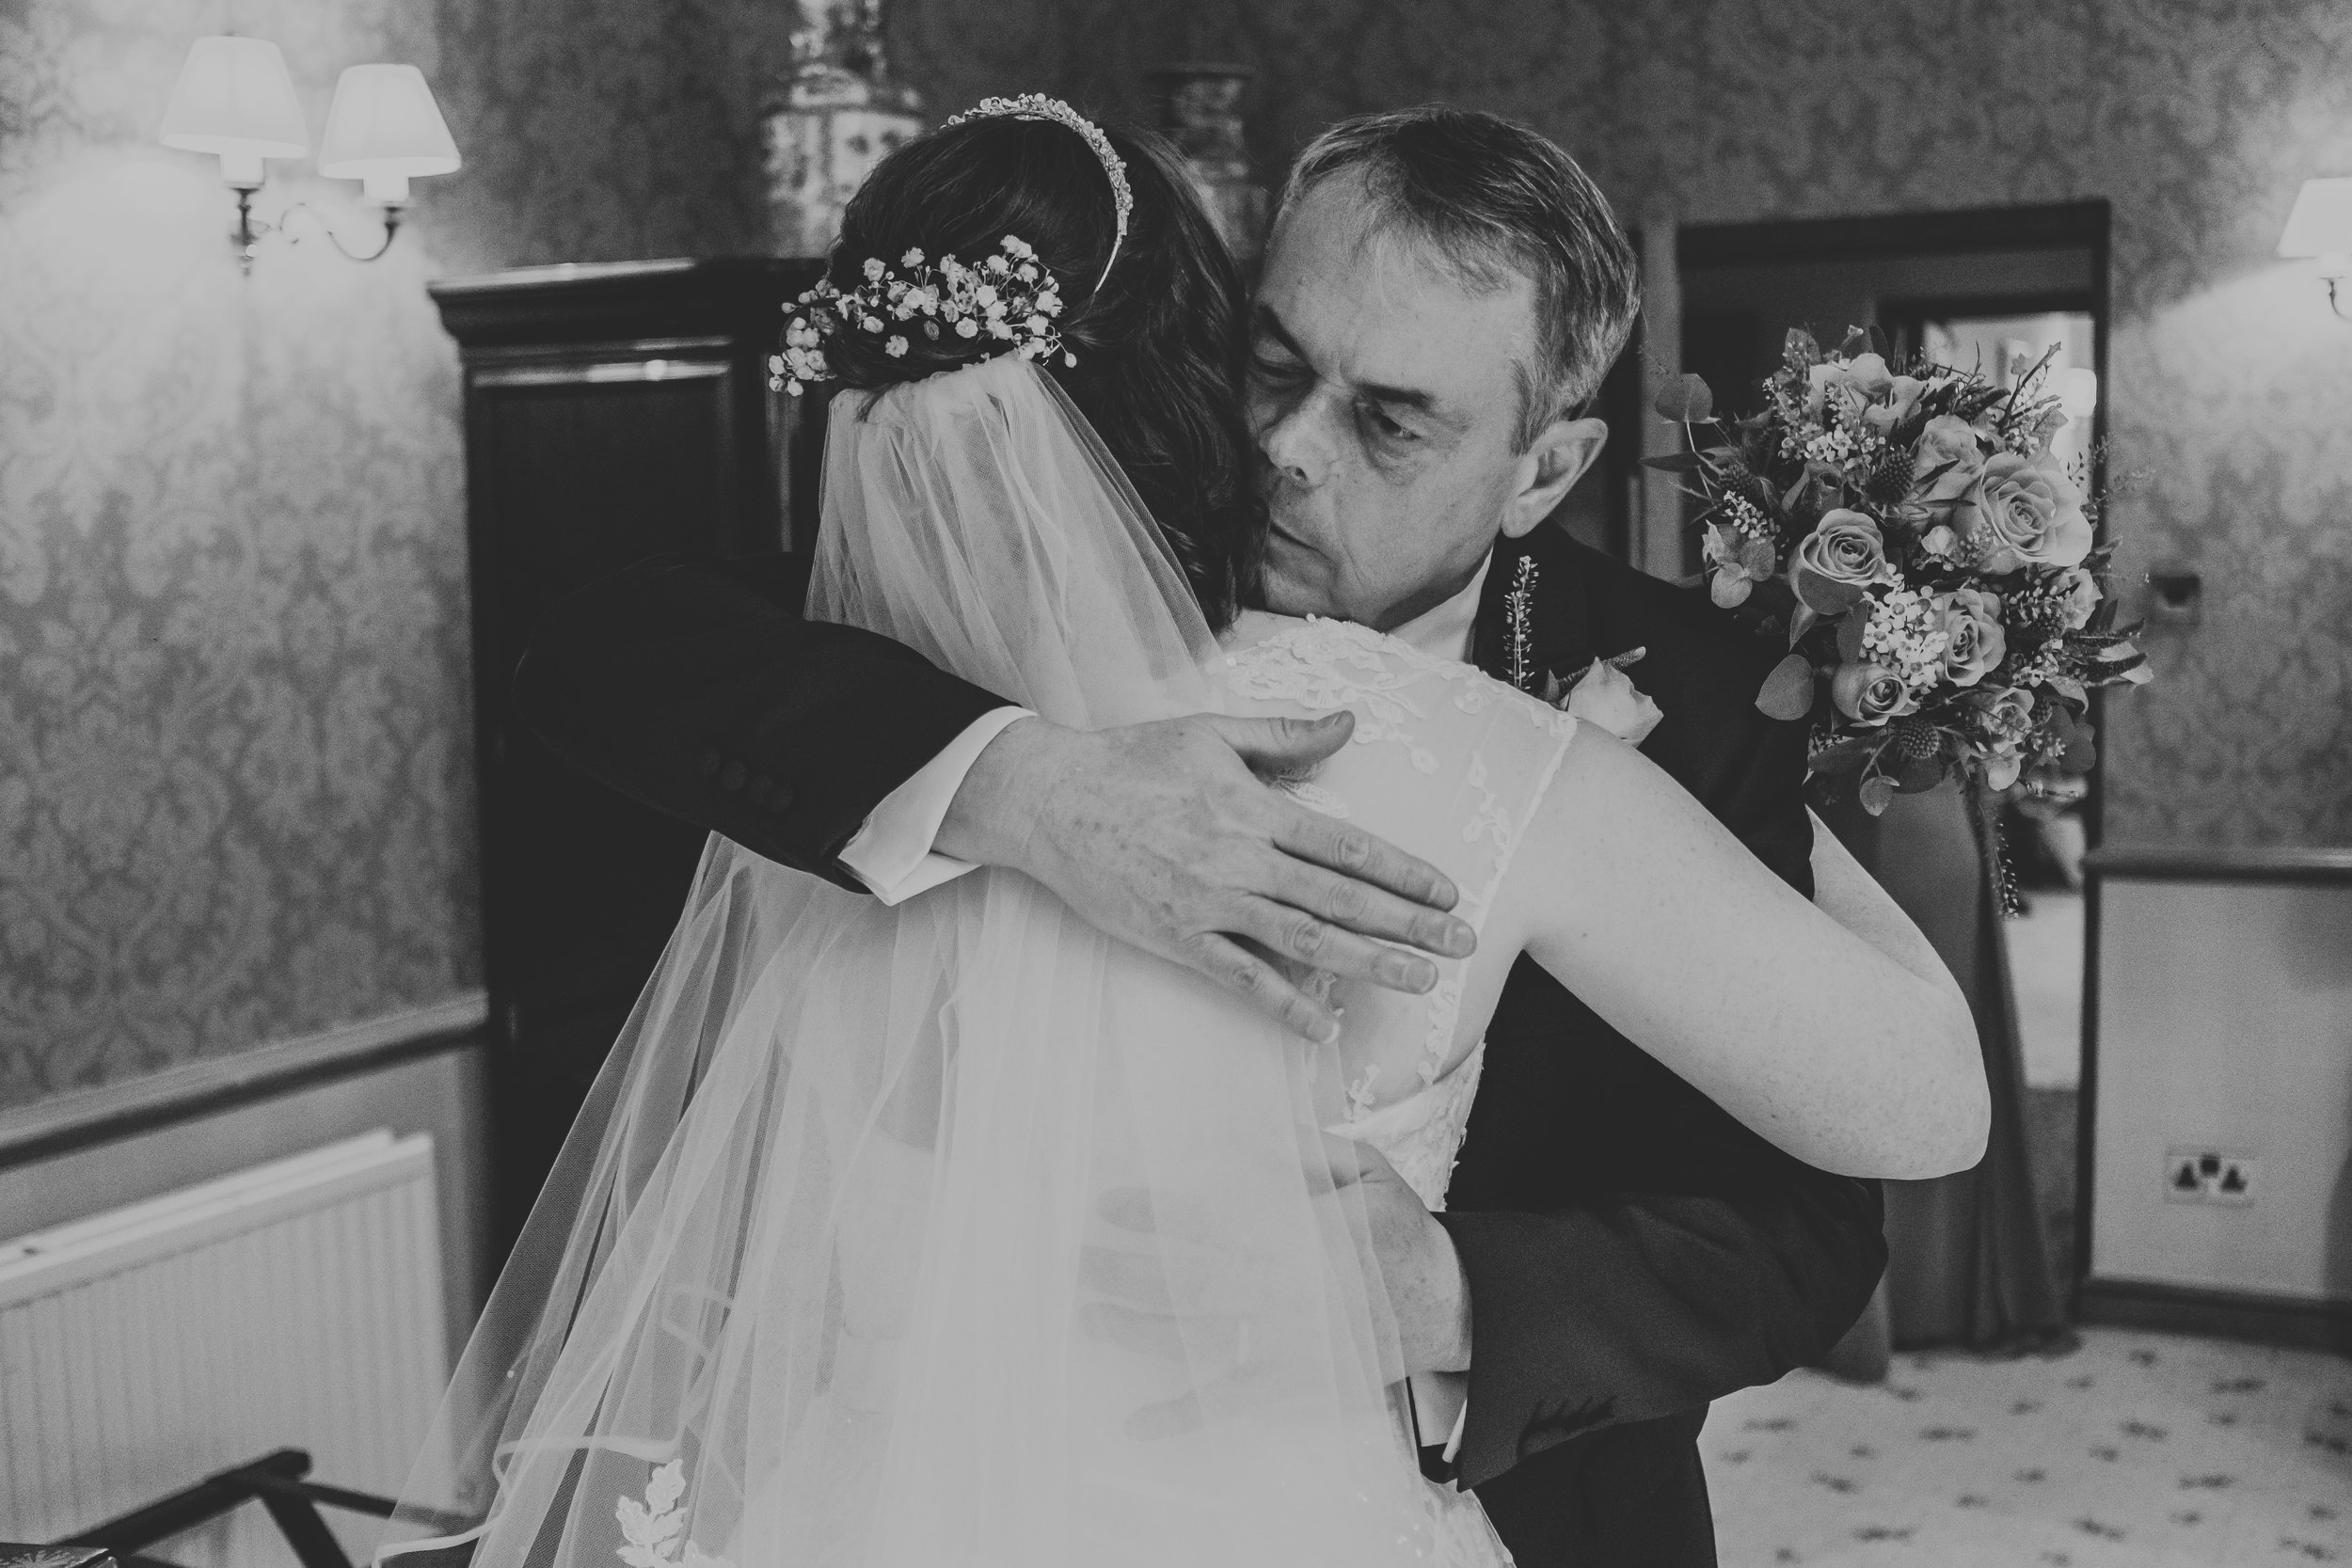 Vicky and Lee Wedding (141 of 590)-nunsmere hall wedding photographer in cheshire documentry wedding photography north west england.jpg